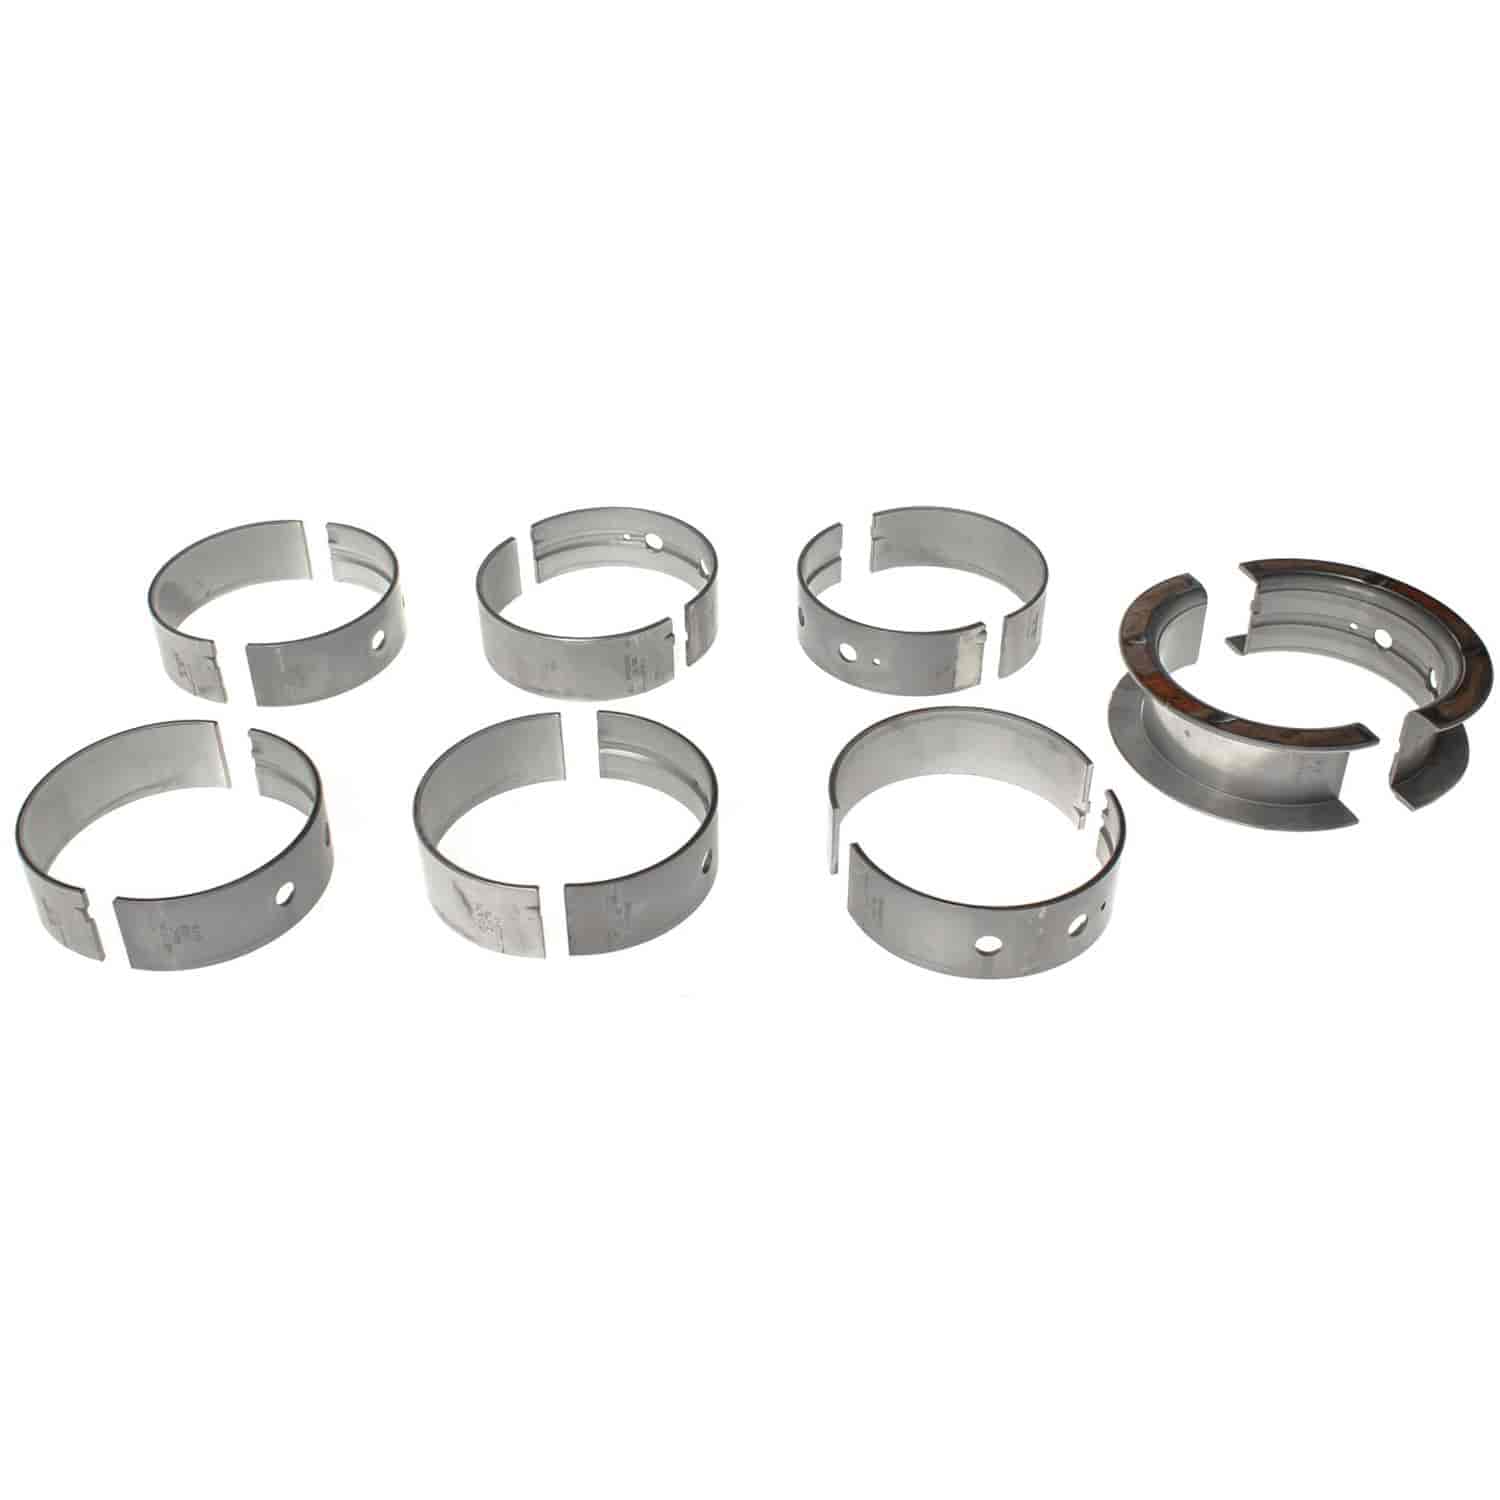 Main Bearings for Cummins 5.9L with Standard Size